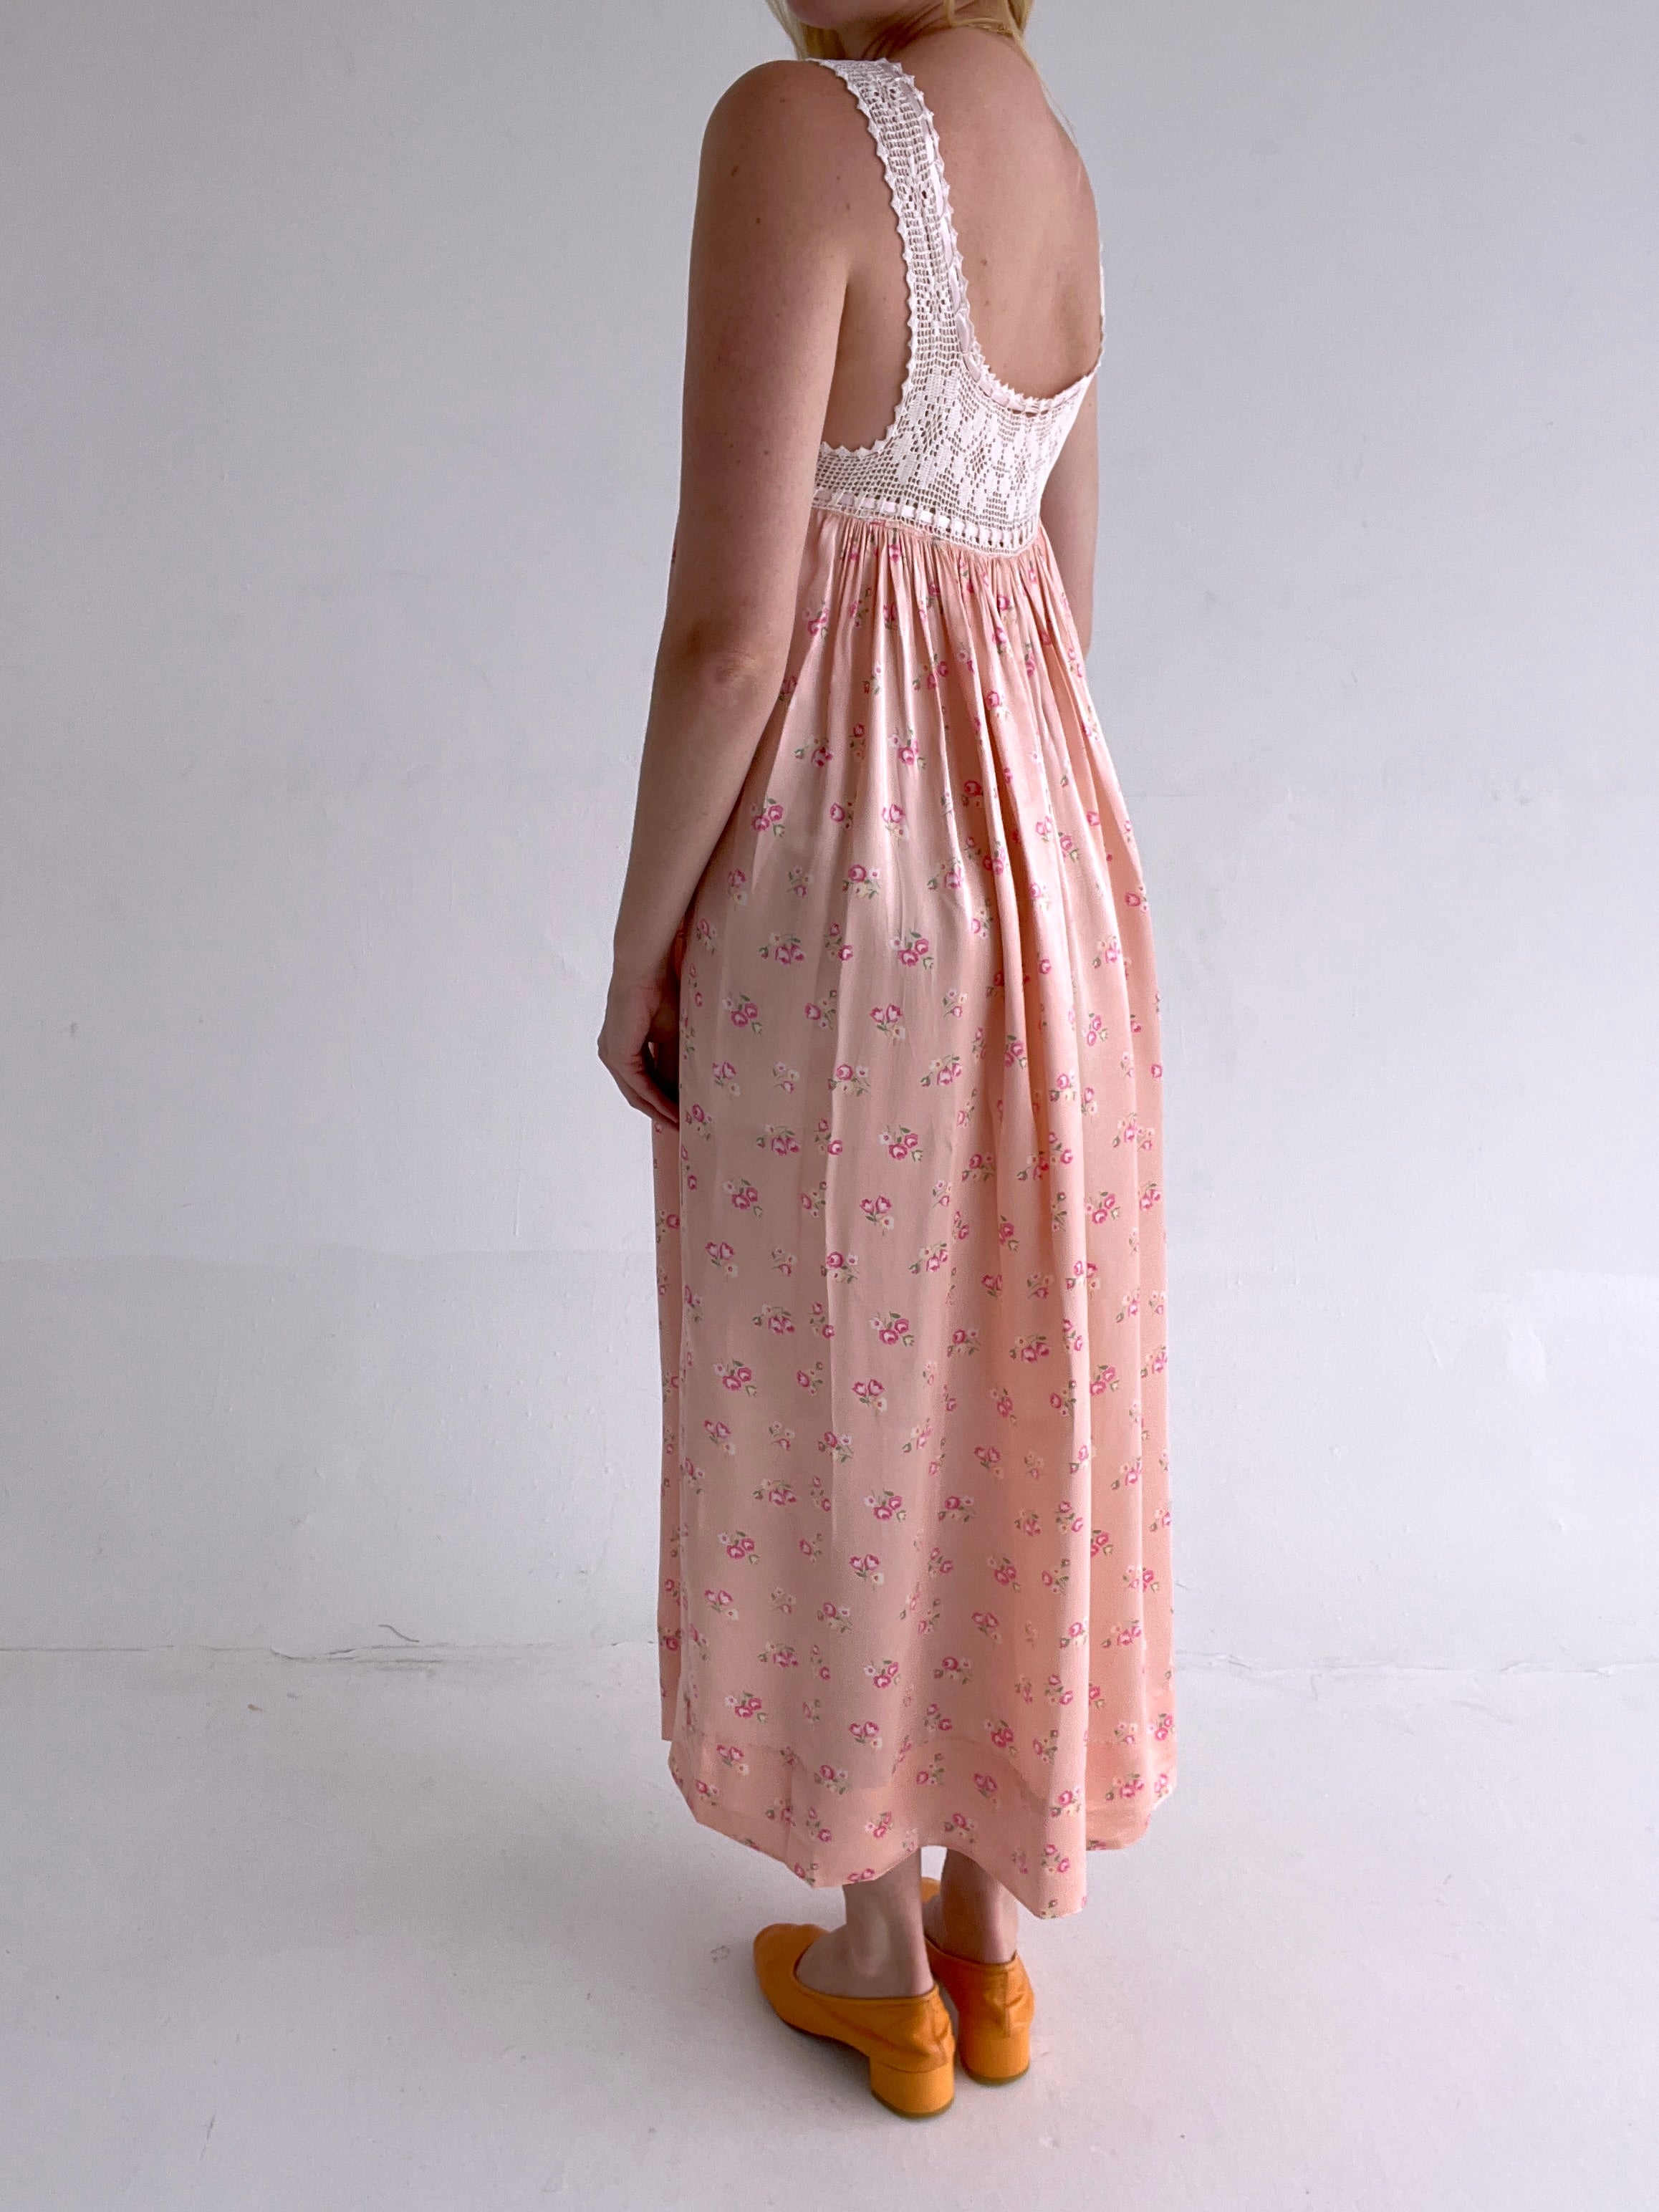 1920's Floral Print Pink Dress with Crochet Top